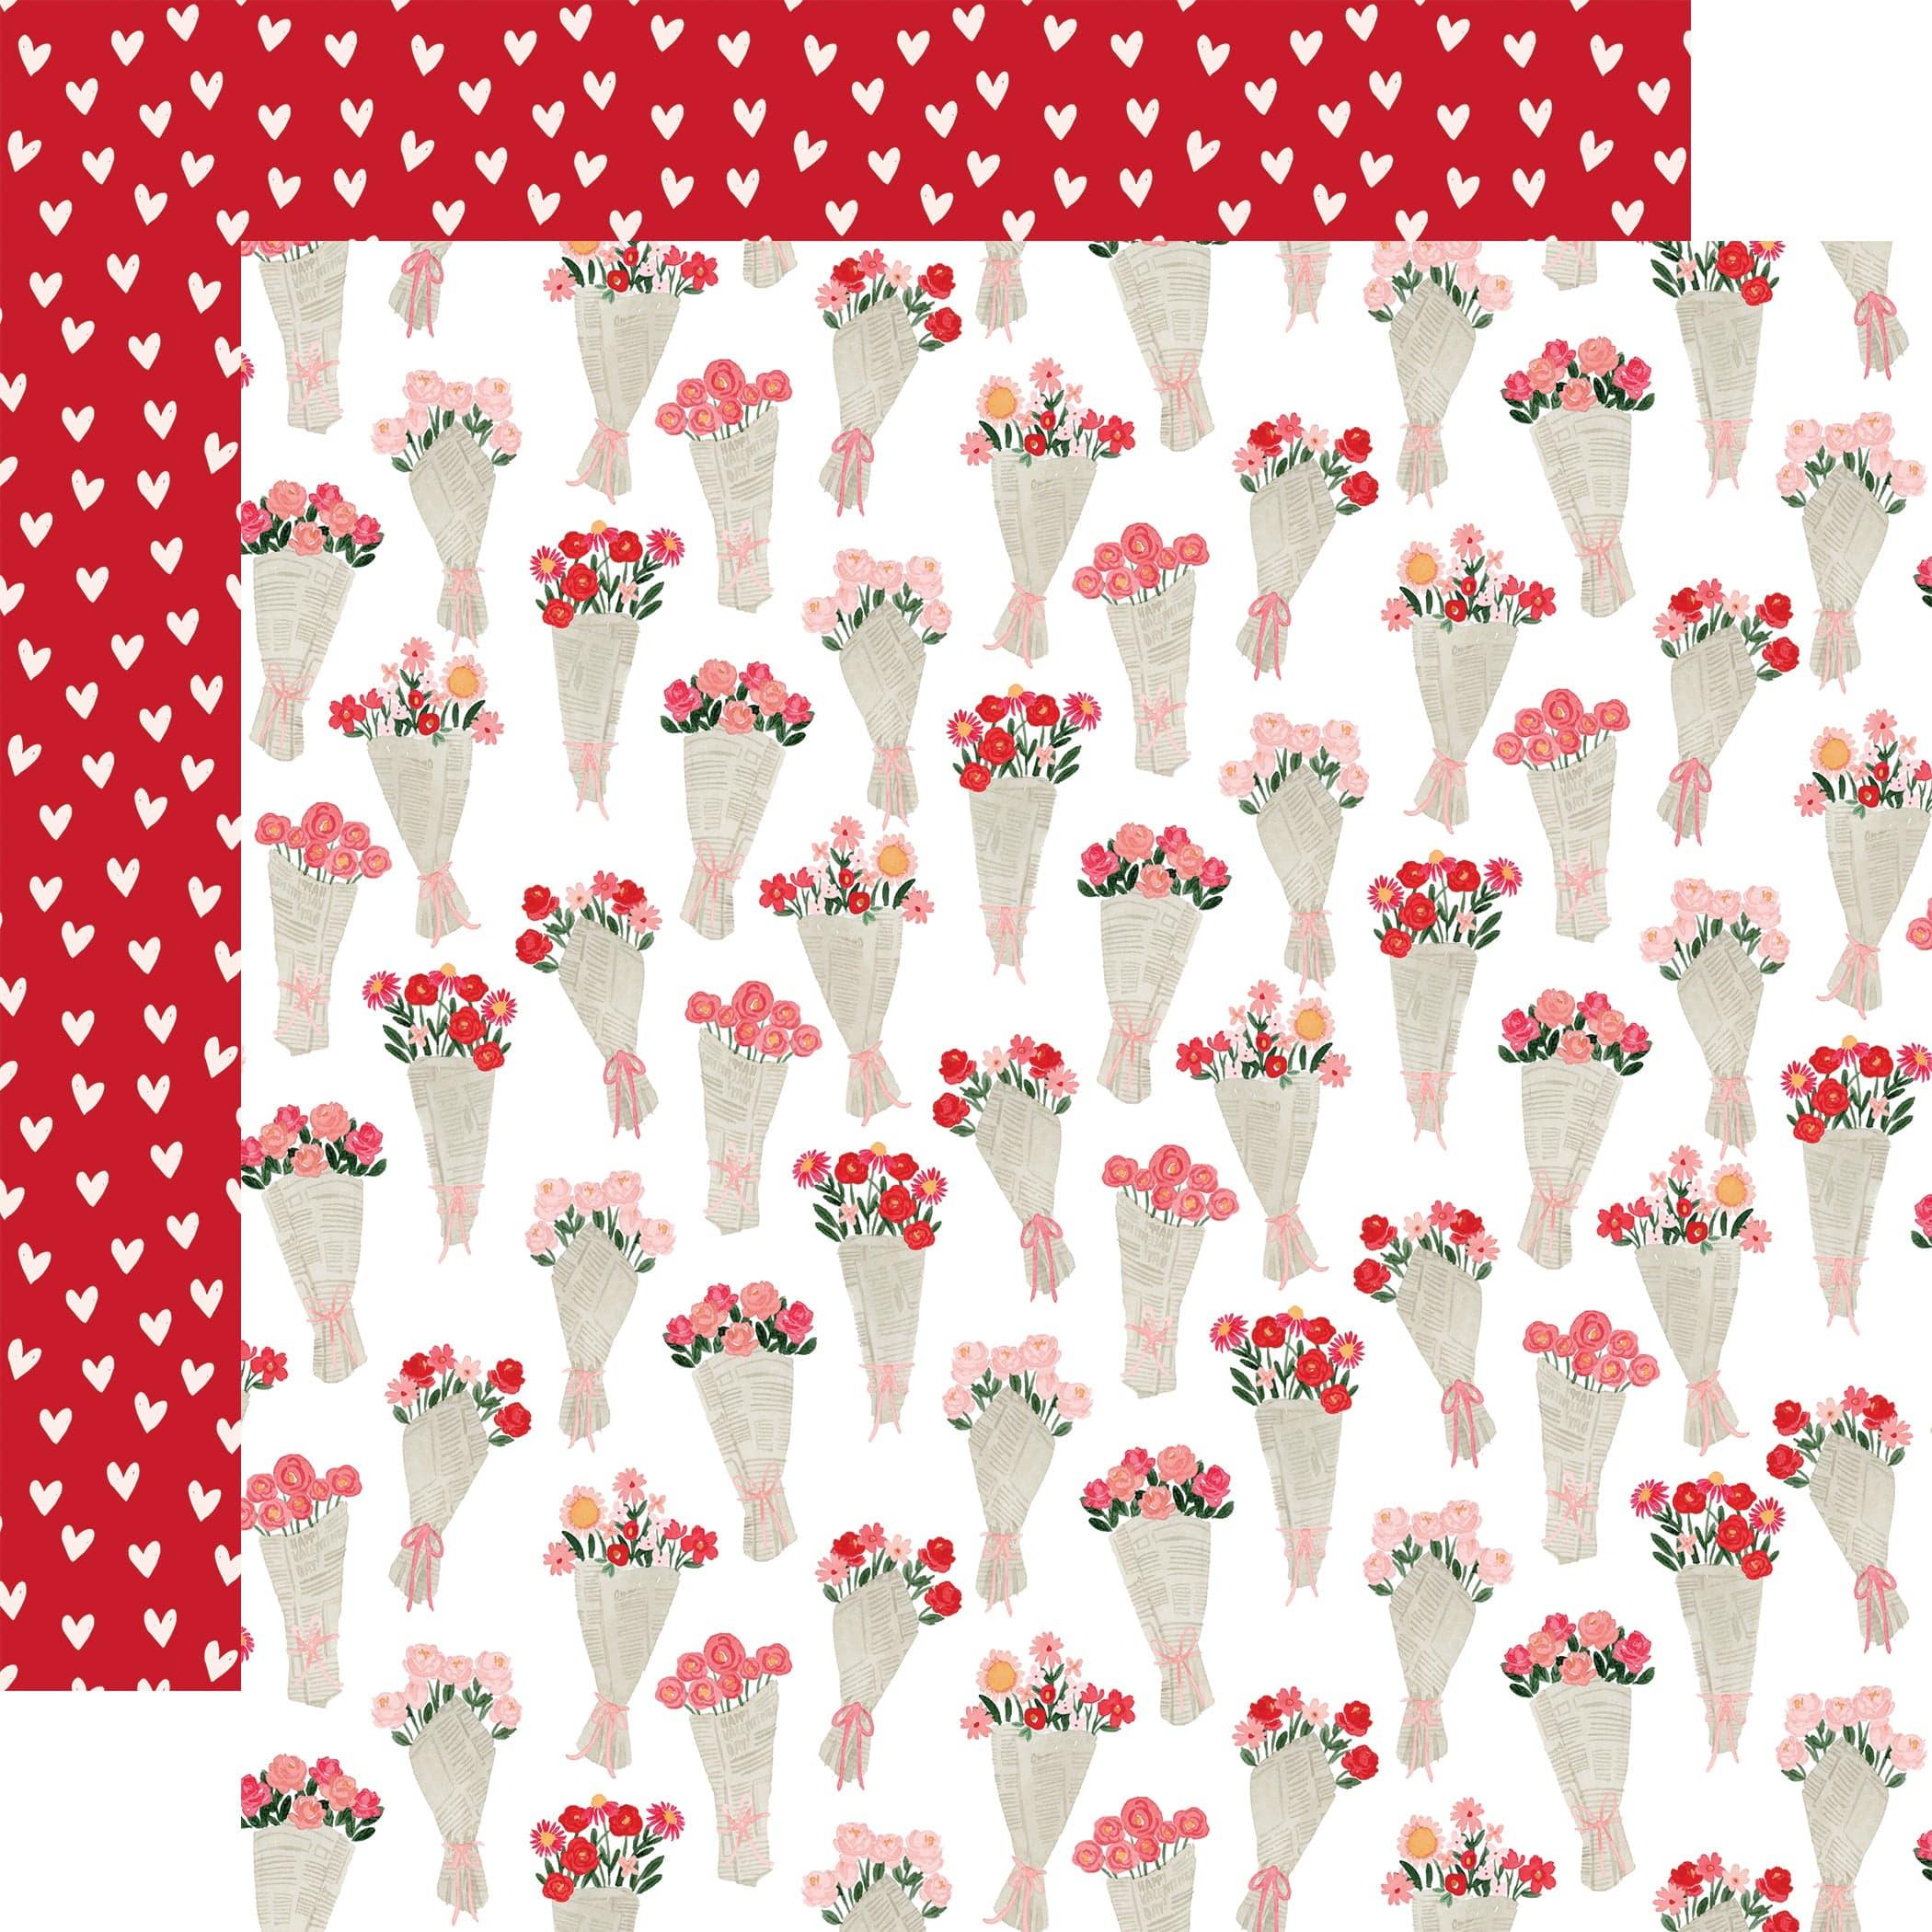 My Valentine Collection Flower Bouquets 12 x 12 Double-Sided Scrapbook Paper by Carta Bella - Scrapbook Supply Companies